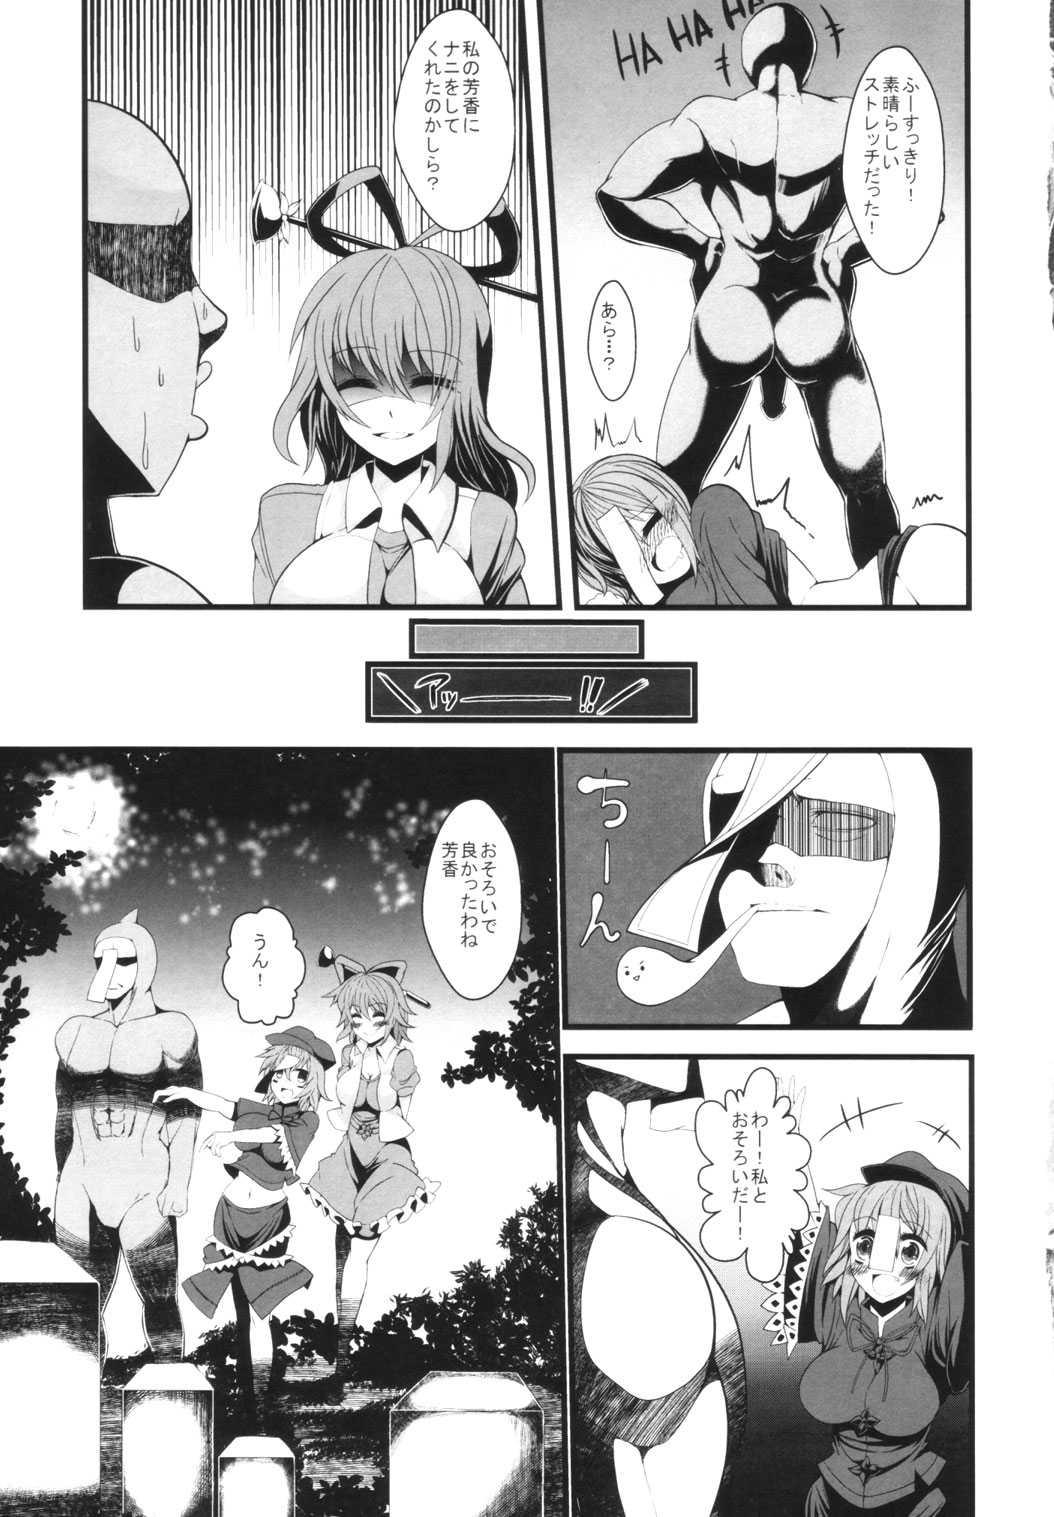 (Reitaisai 9) [Gang Koubou (78RR)] Yoshika chan to H na Stretch (Touhou Project) (例大祭9) [ぎゃんぐ工房 (78RR)] 芳香ちゃんとHなストレッチ (東方 Project)